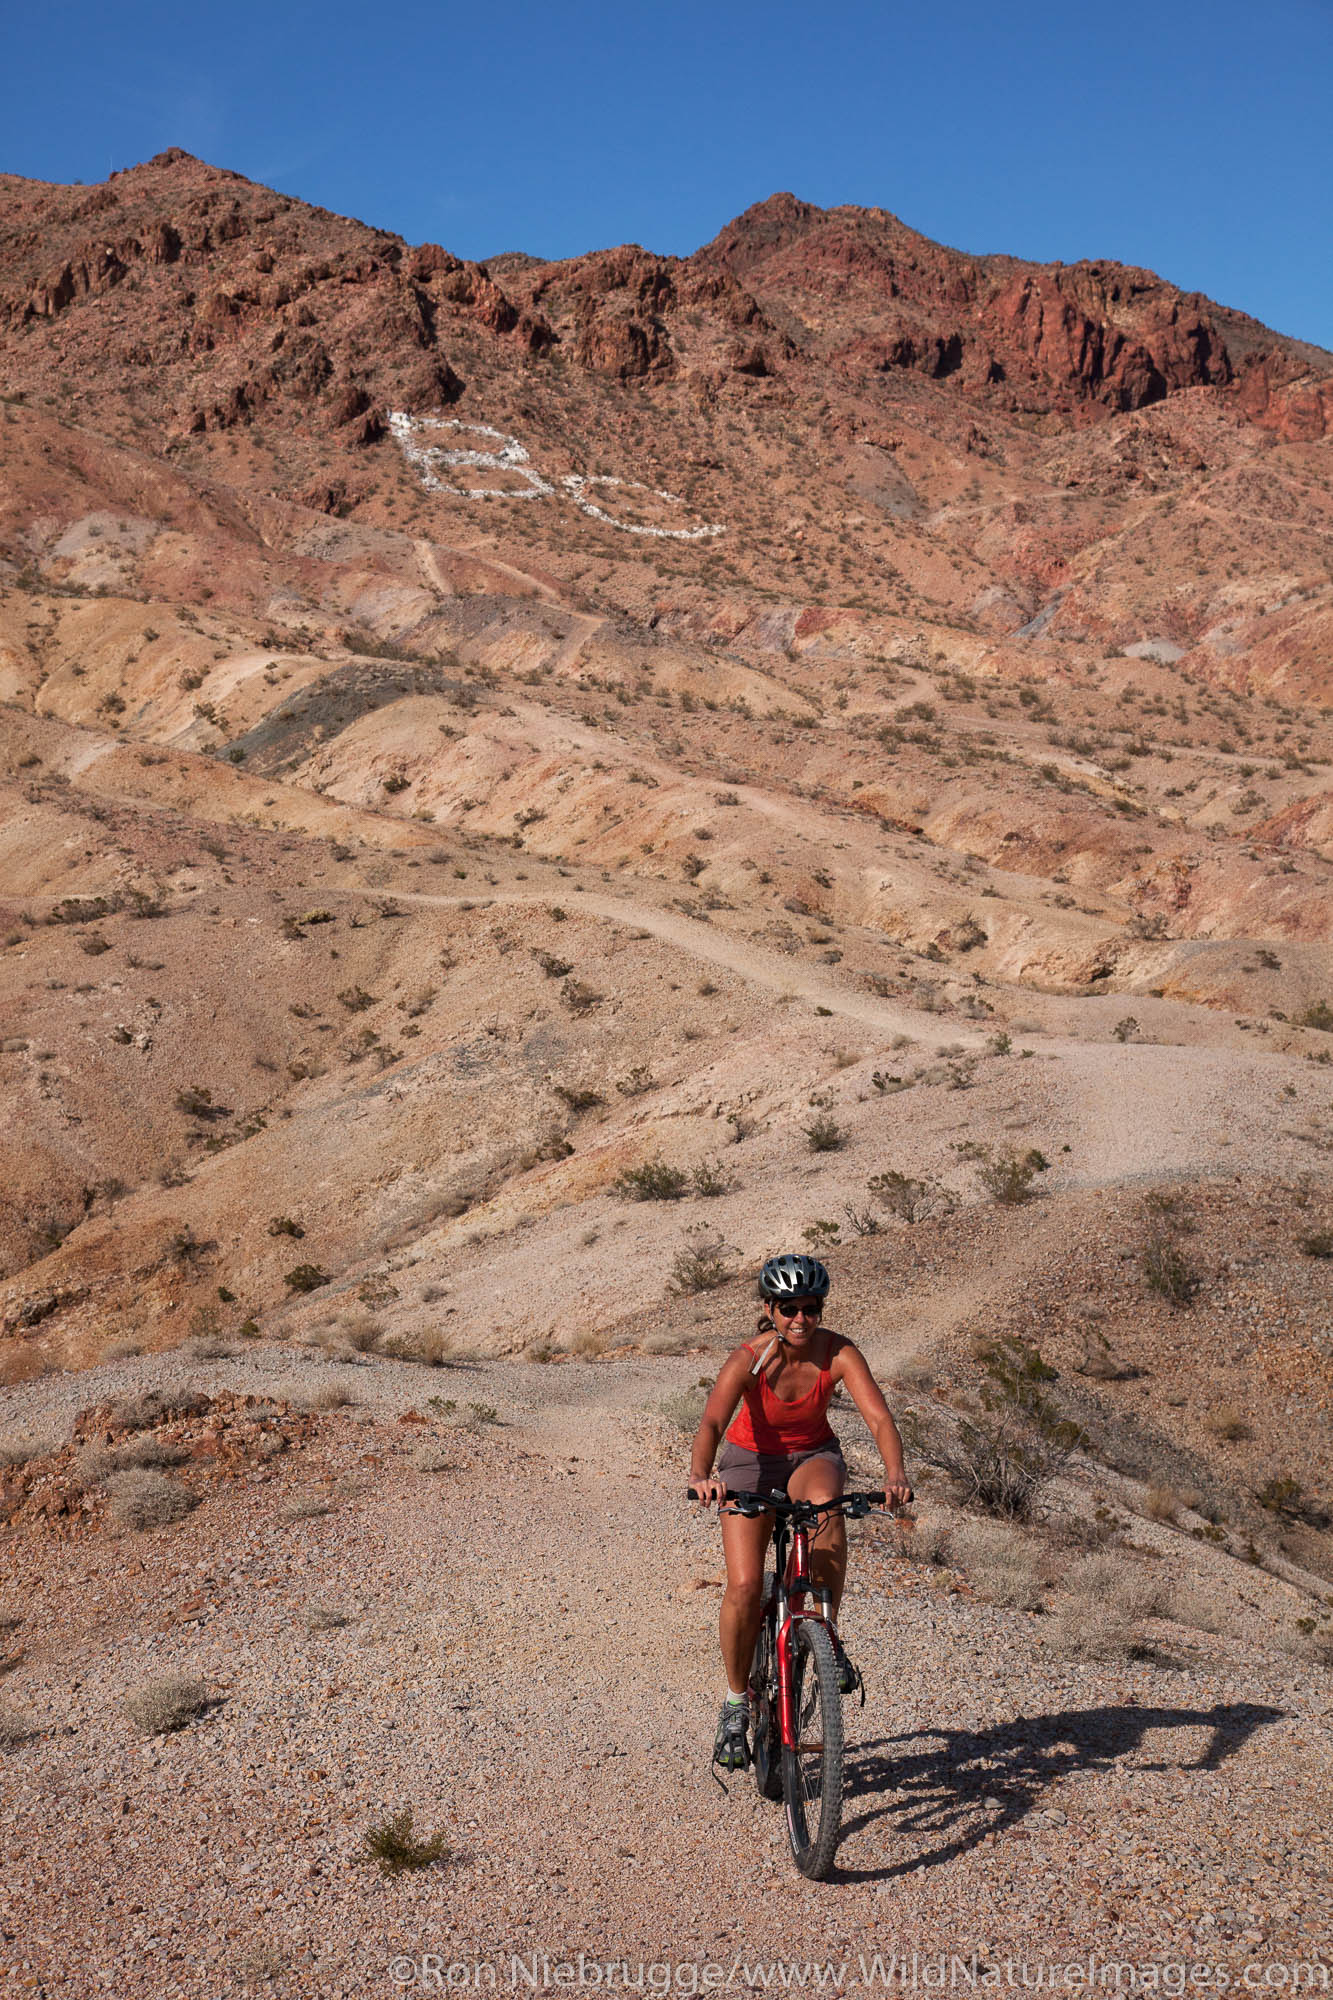 Mountain biking on the trails at Bootleg Canyon Mountain Bike Park, Boulder City, Nevada (model released)